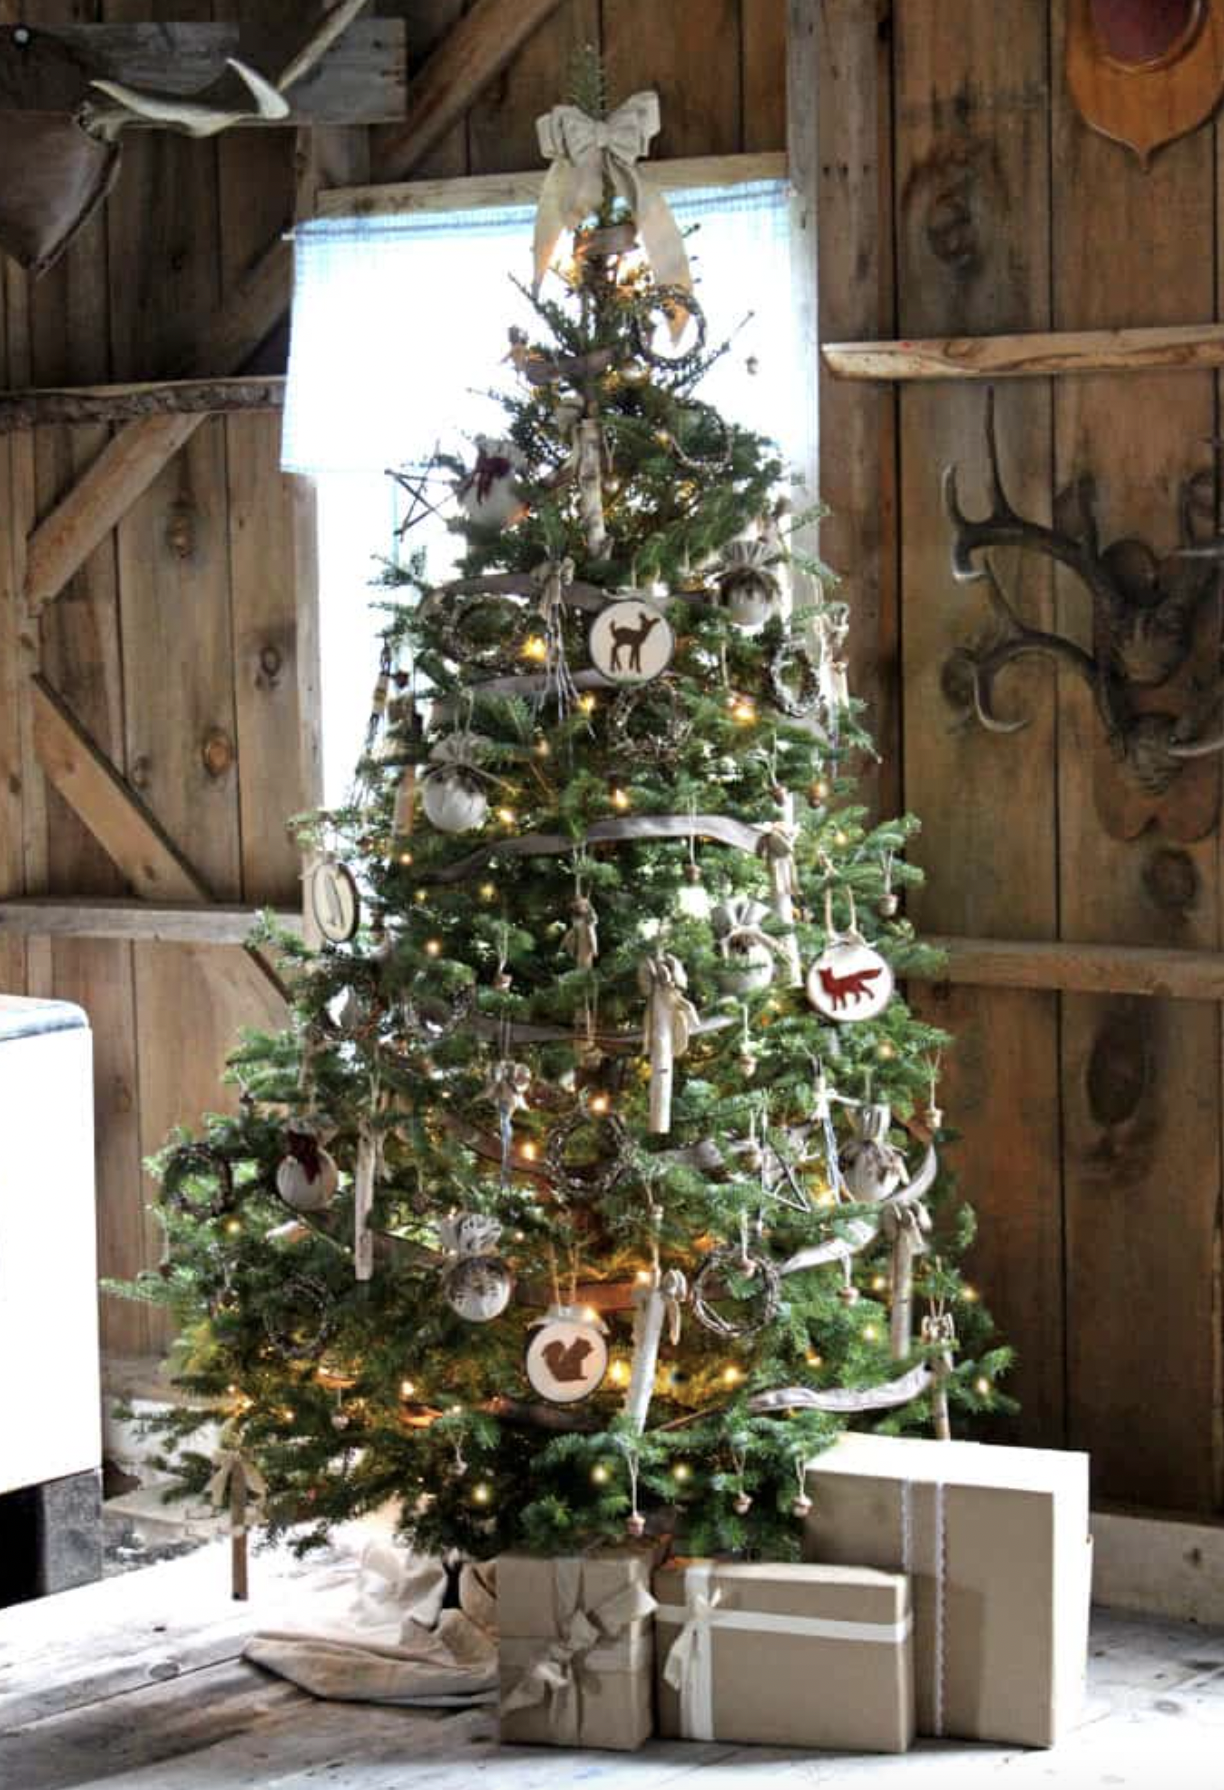 50 Best Rustic and Country Christmas Décor Ideas for Your Home